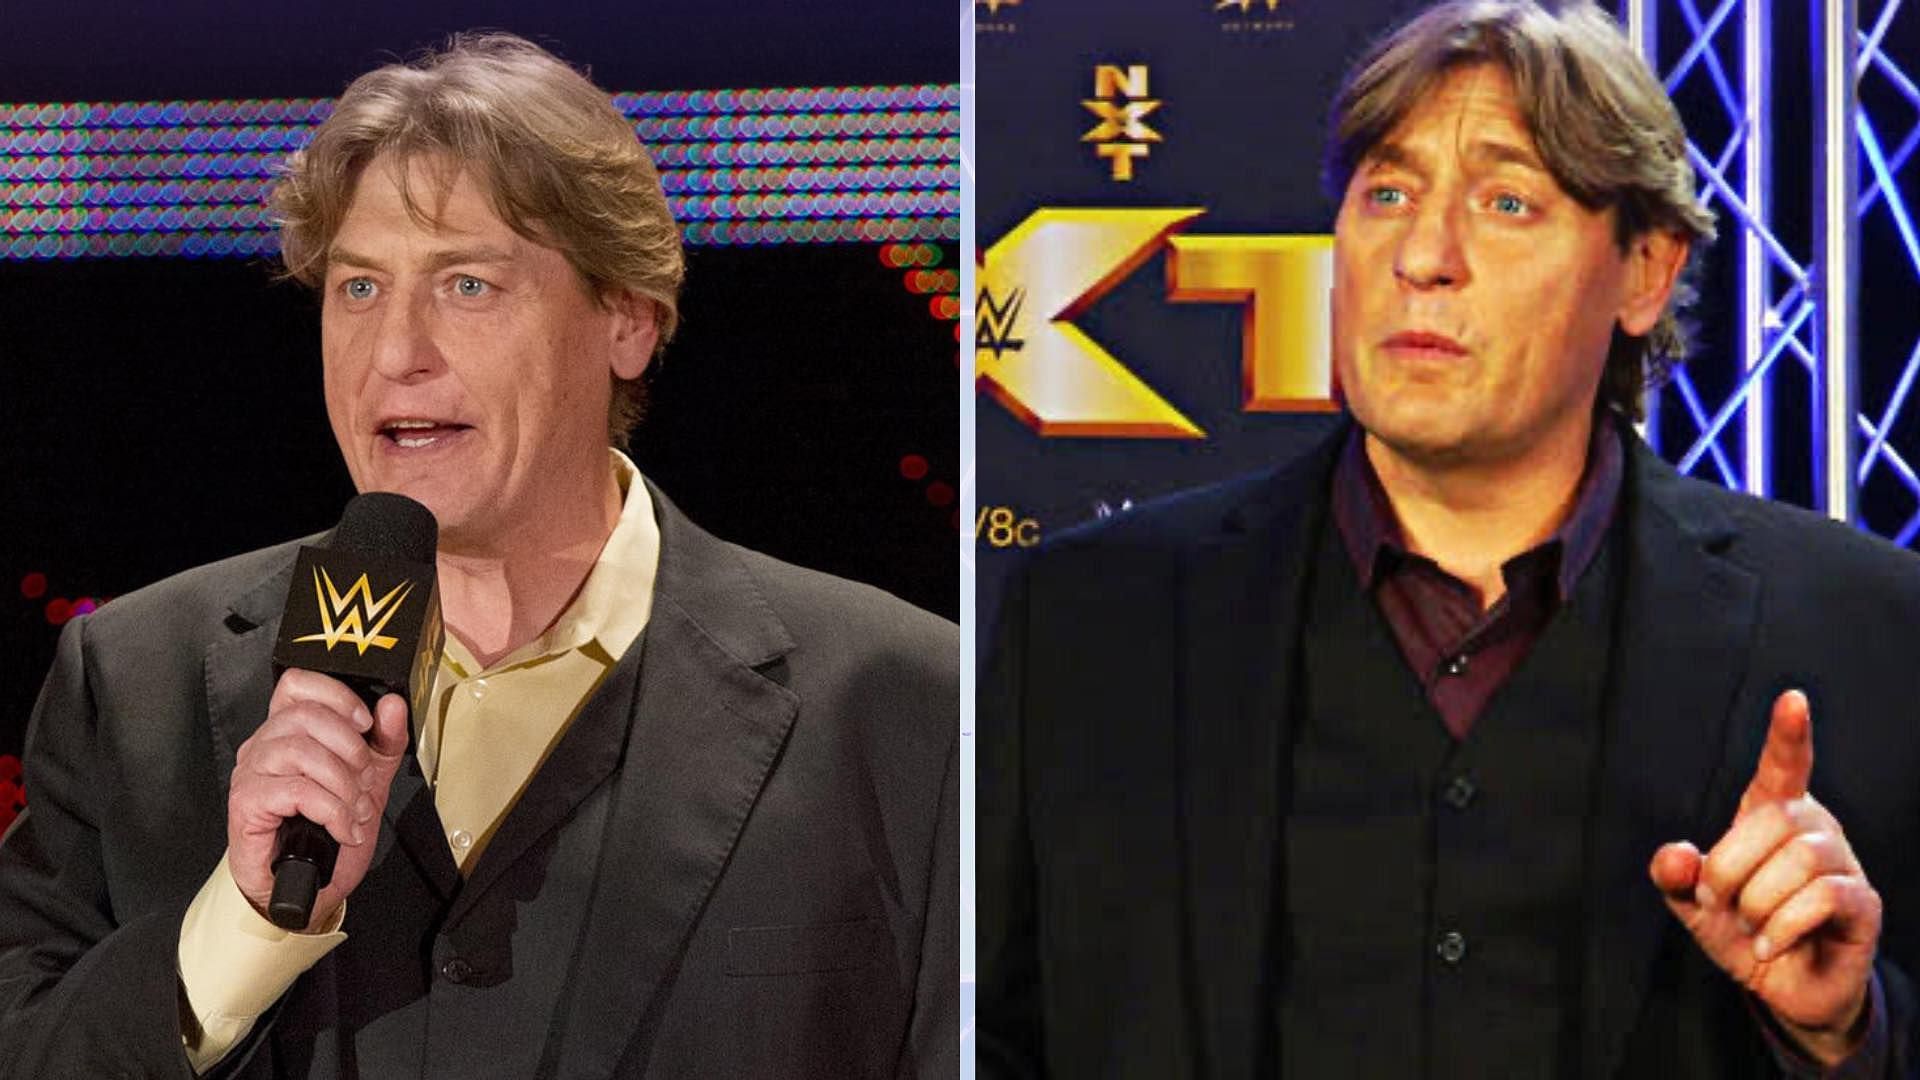 William Regal returned to WWE television on NXT tonight.